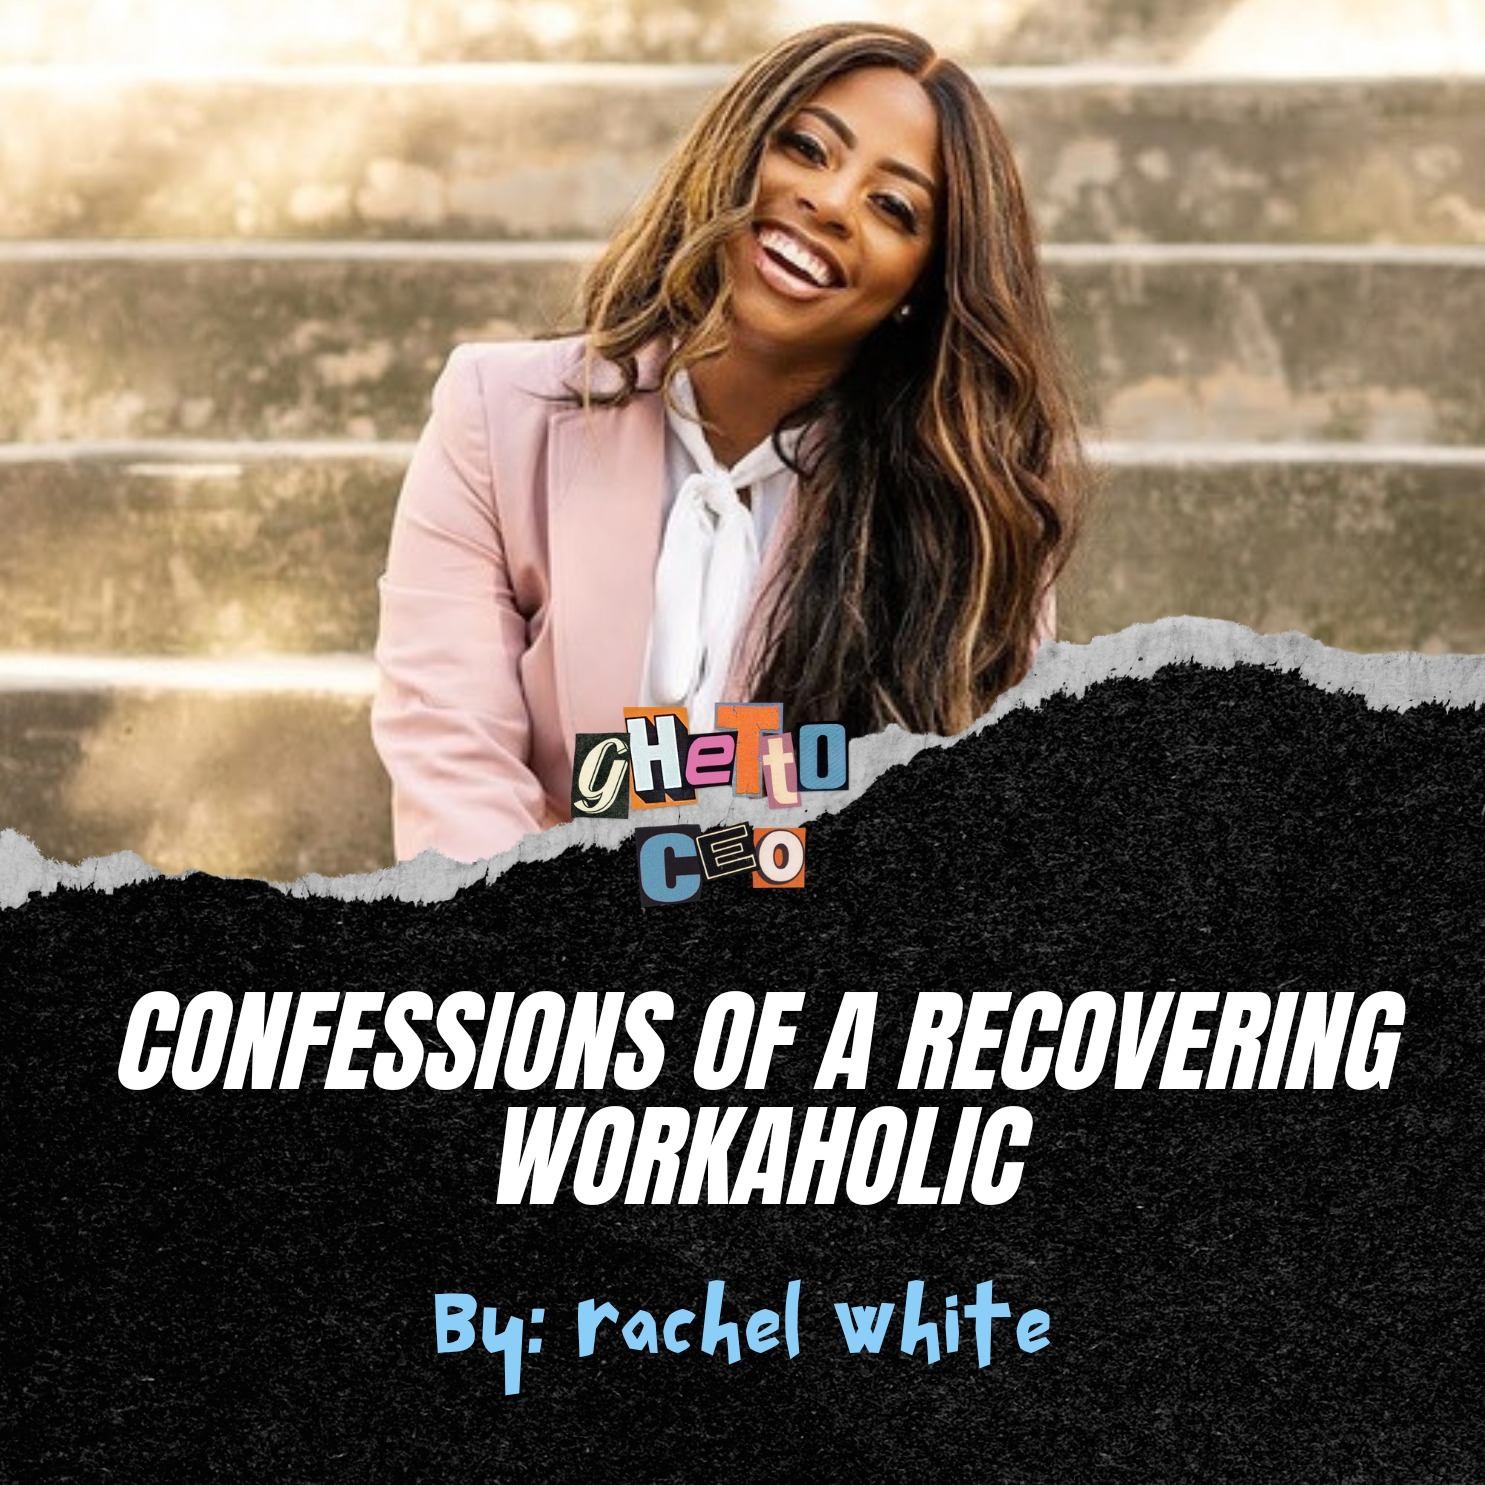 Confessions of a Recovering Workaholic| By: Rachel white